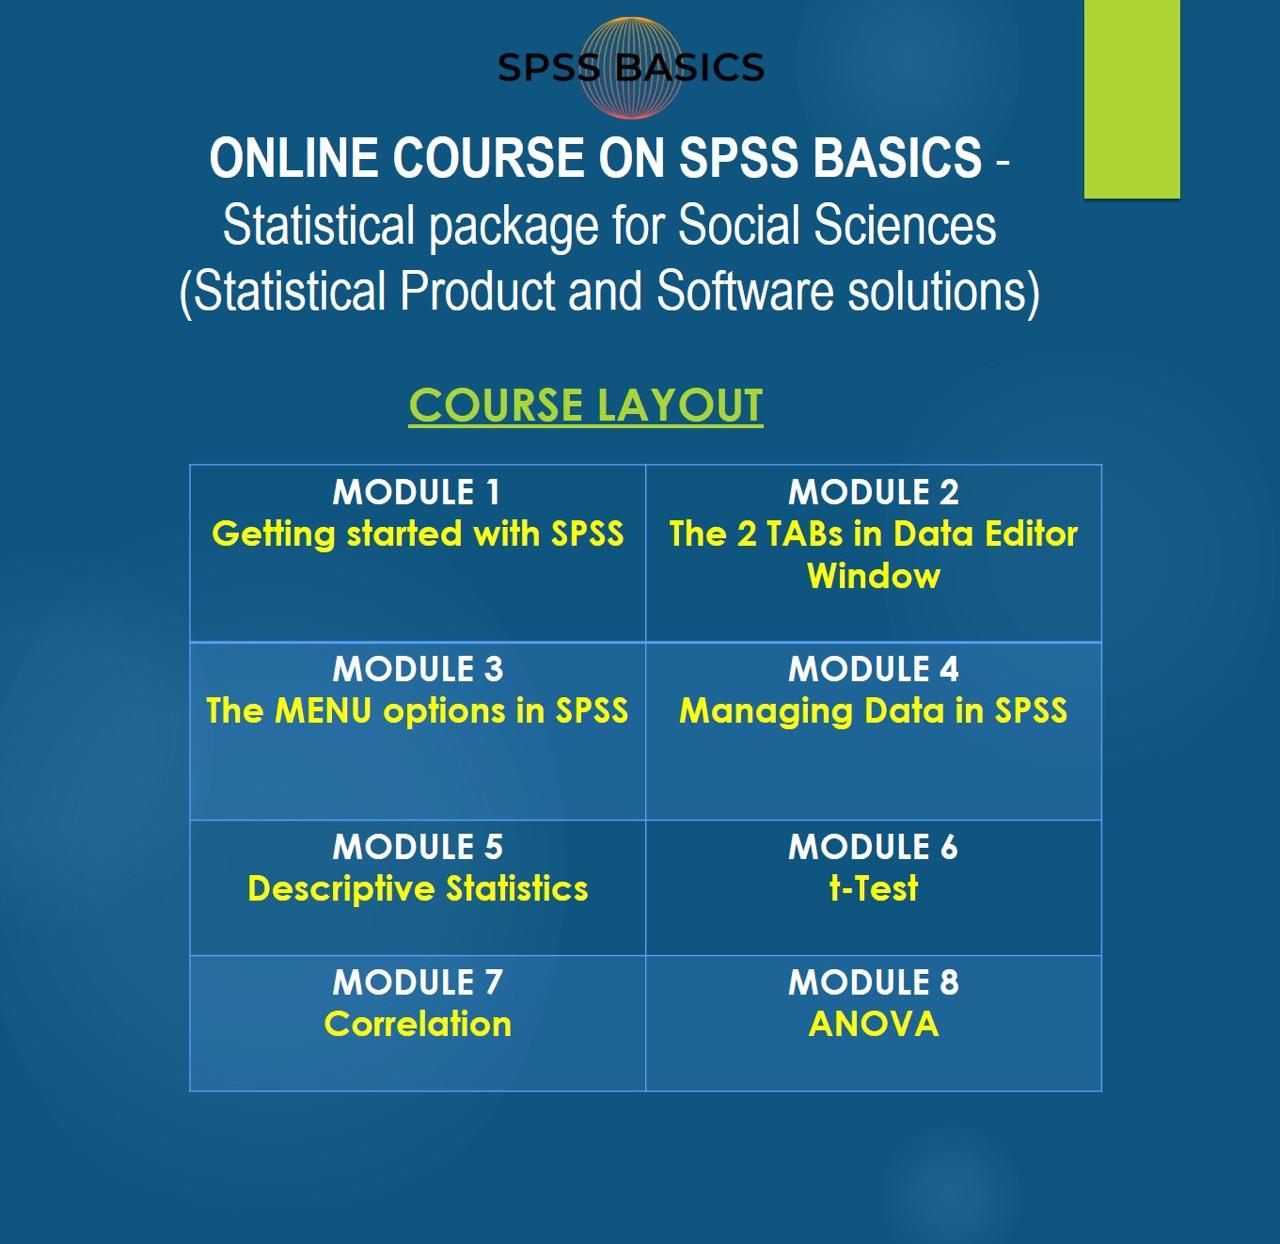 Online Course on SPSS Basics Statistical package for Social Sciences (Statistical Product and Software Solutions)